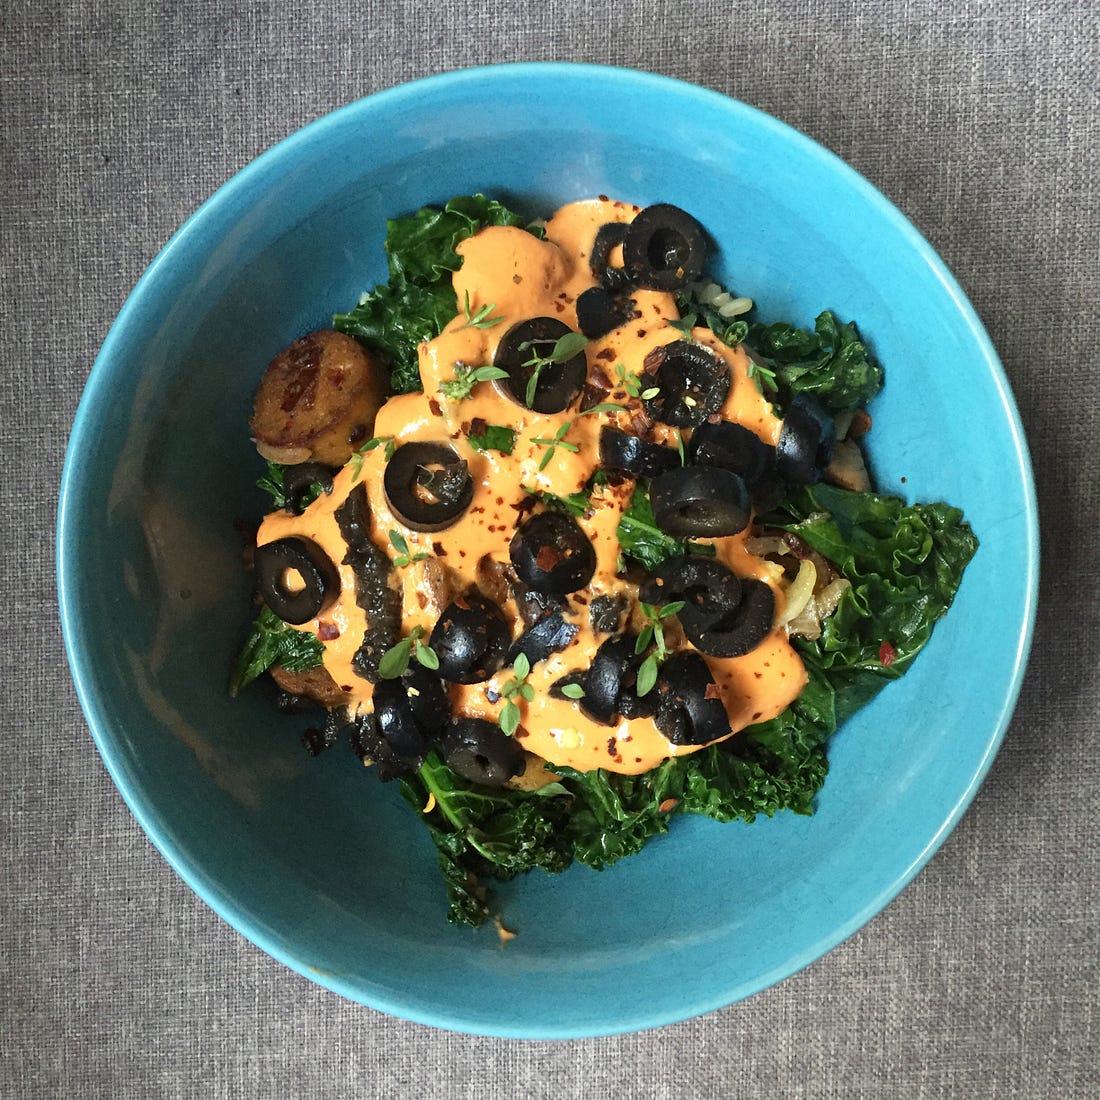 A blue bowl from above, filled with kale and sausage and covered in a cheesy sauce. Black olive slices, thyme leaves, and chili flakes are sprinkled on top.